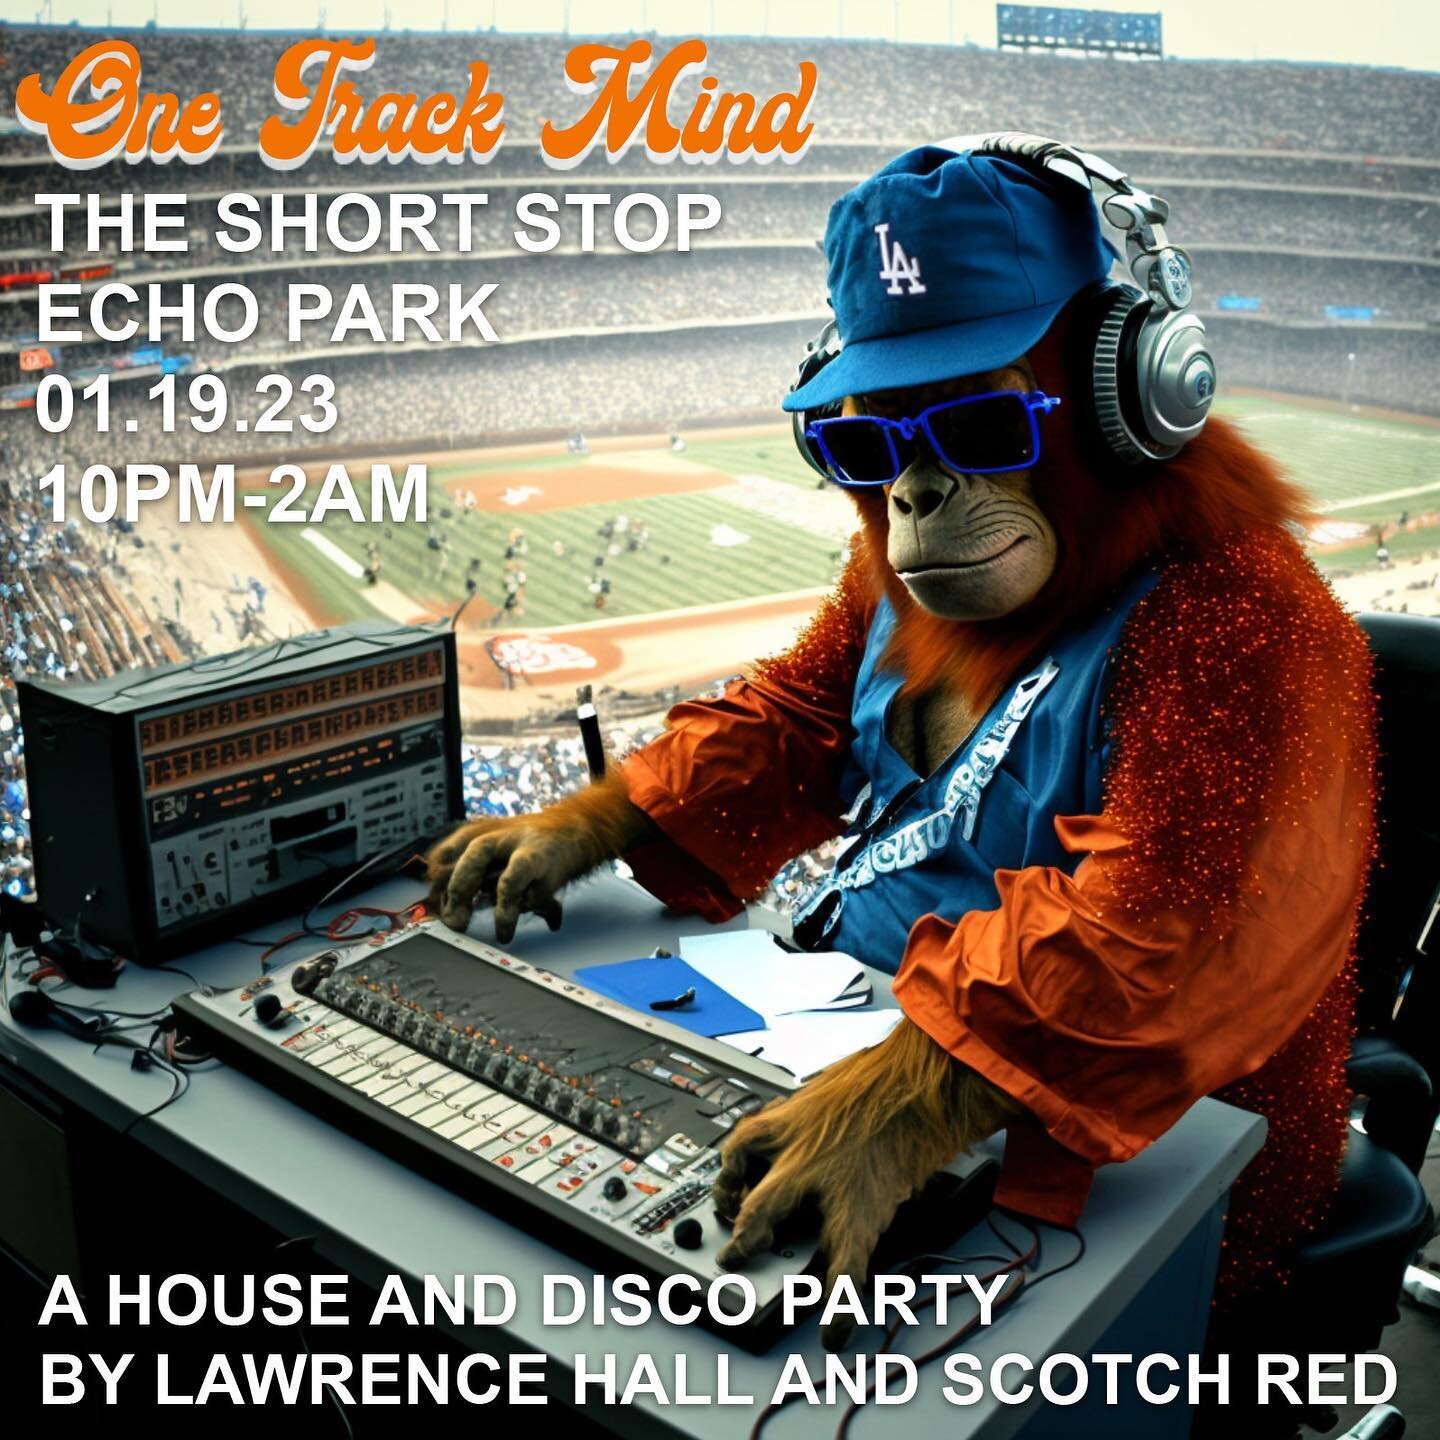 🚨🚨 ANNOUNCING 🚨 🚨
We are excited to report that tonight, Lawrence Hall and Scotch Red begin our new monthly party ONE TRACK MIND at @theshortstopechopark . Come tear up the dance floor with us tonight and every 3rd Thursday of the month going for